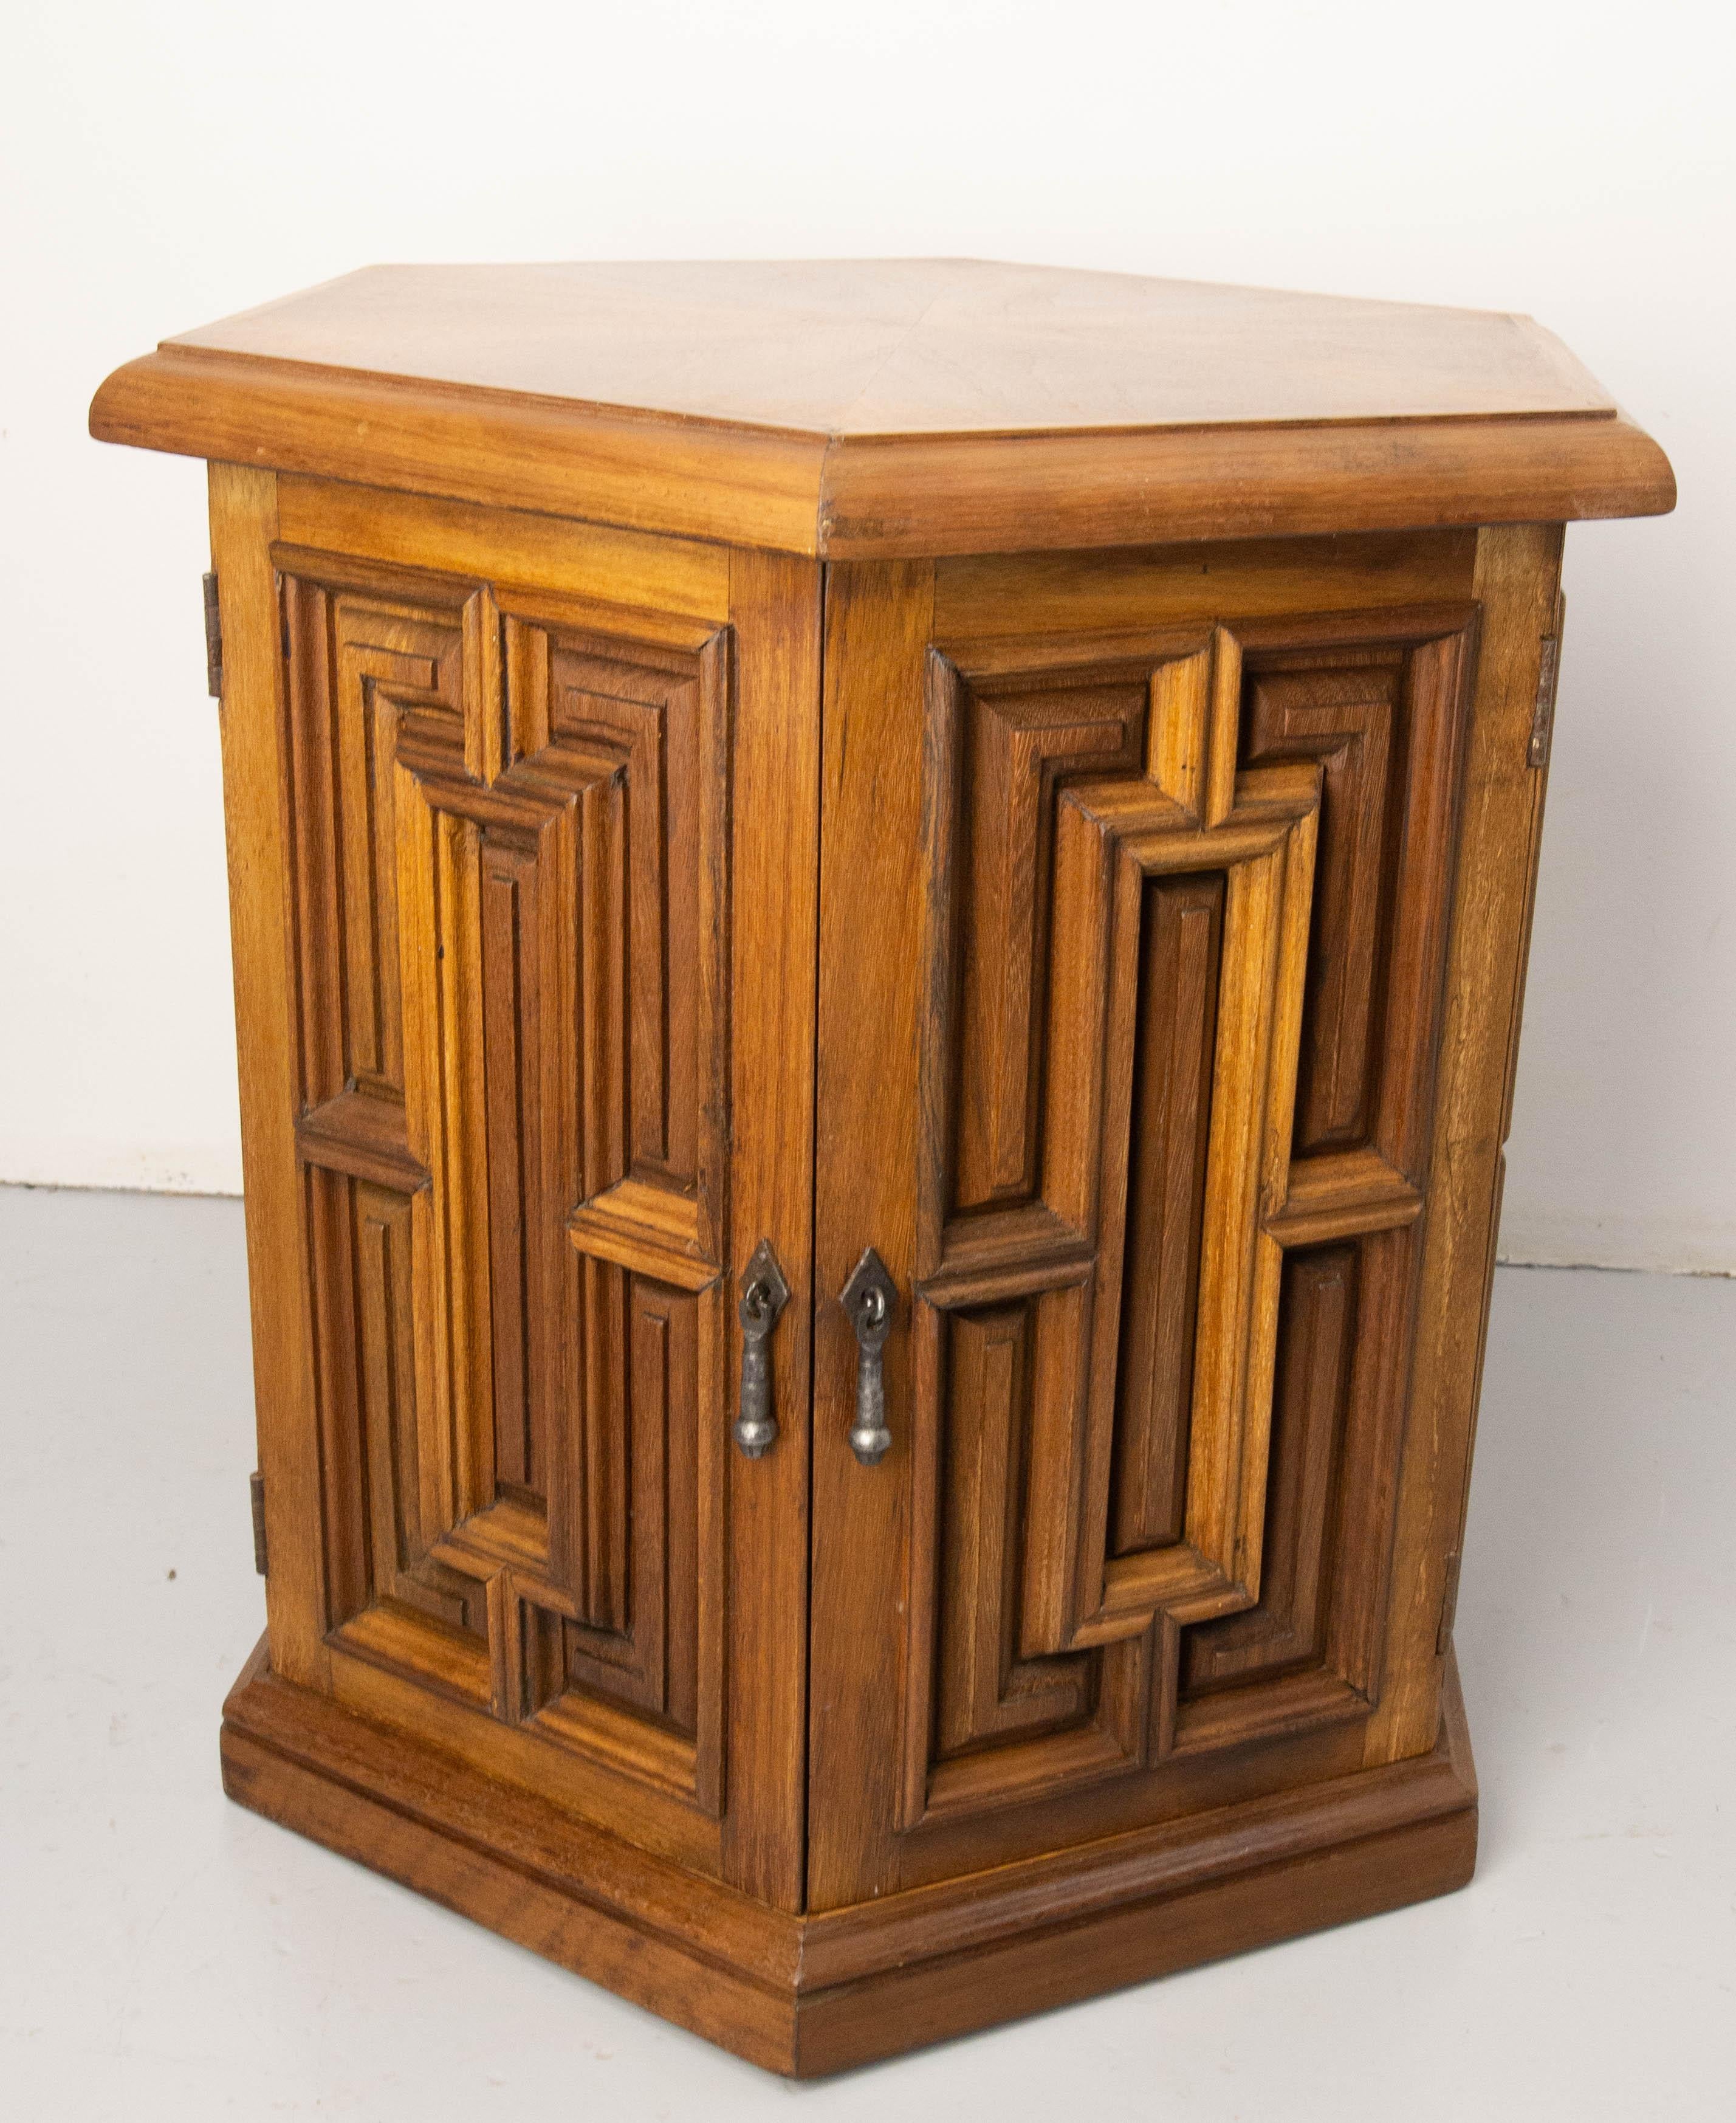 Side, end table, selette or nightstand. The size of this little cabinet with an intern shelve, allows to imagine many uses for it.
Made circa 1960
Beautiful play of exotic wood colors.
French.
Good vintage condition.

Shipping 
57 / 49 / 54 cm 17.5